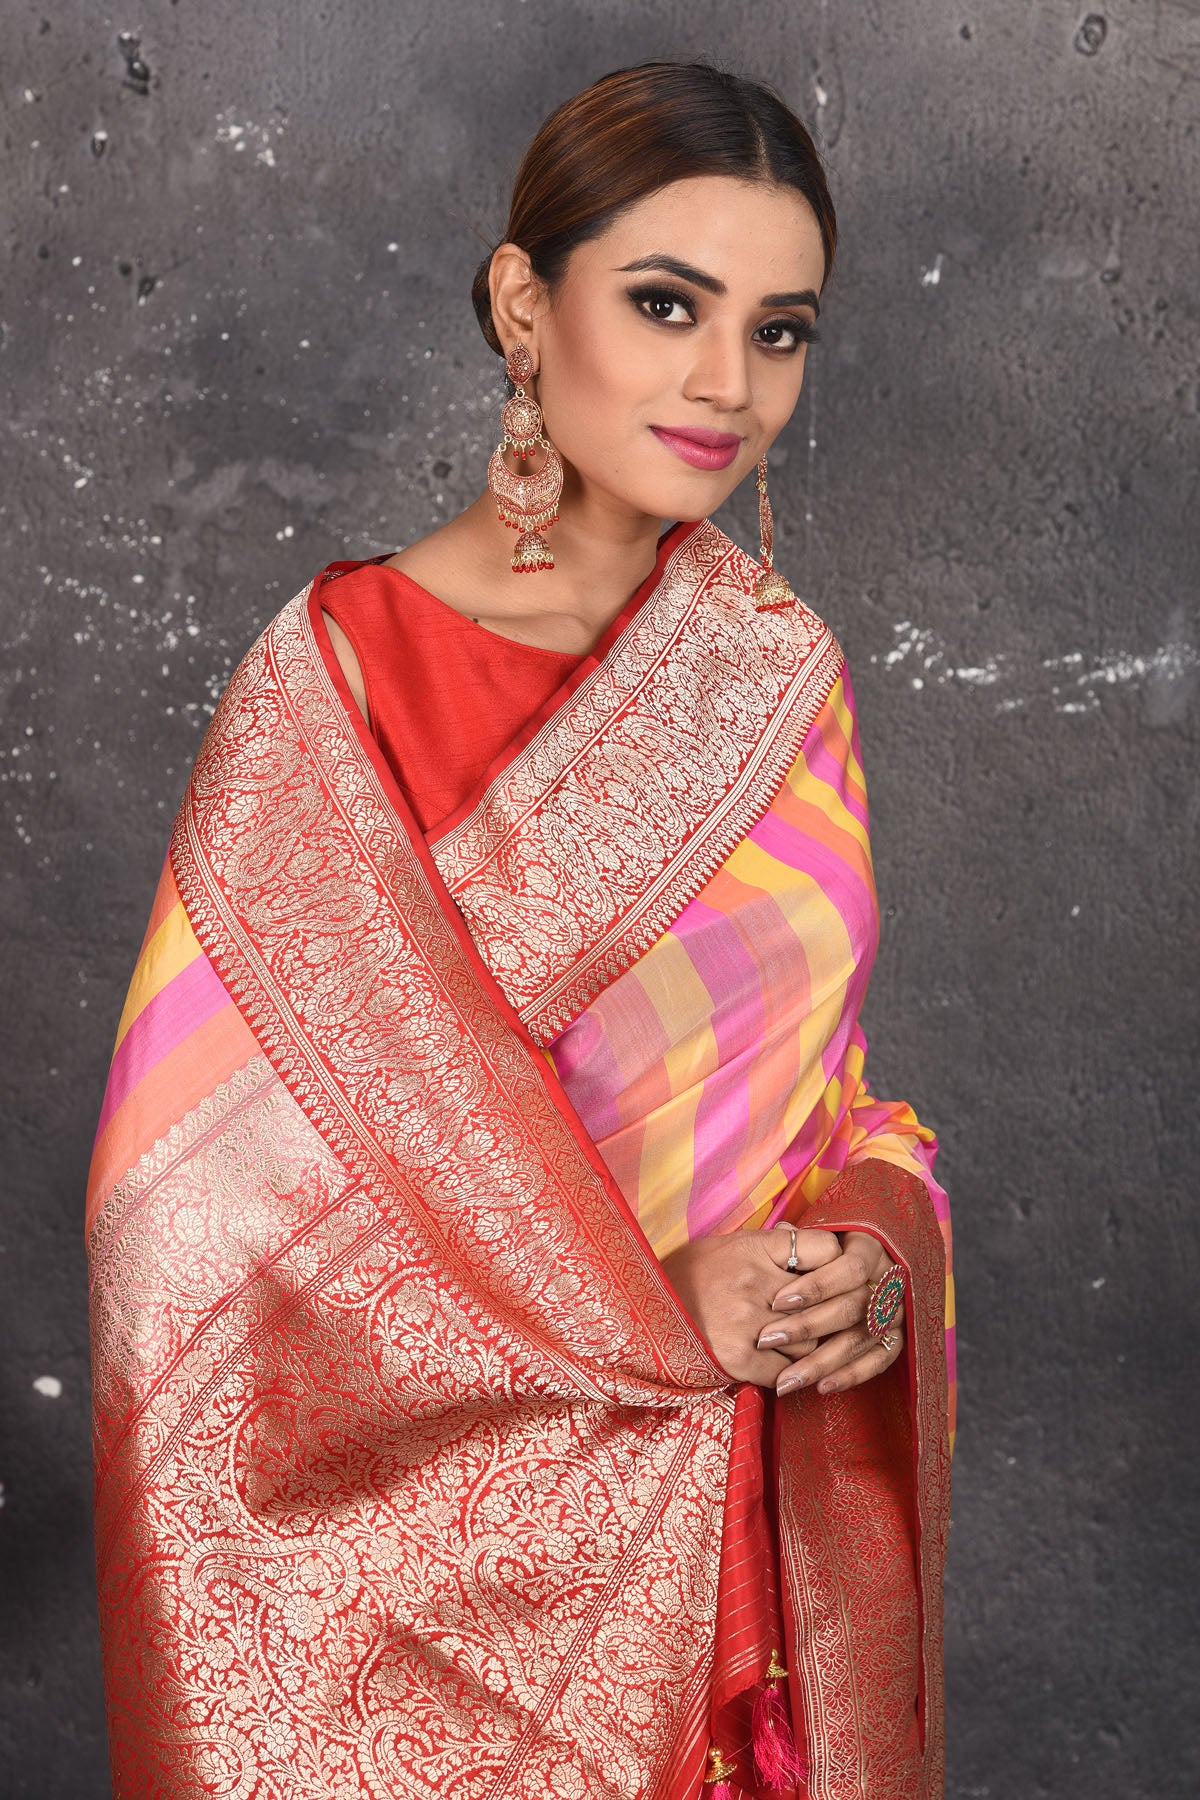 Buy this classy red banarasi silk brocade woven diagonal stripes and floral saree online in USA which has beautiful zari work all over the heavy border and end with handmade latkan. Pair this royal banarasi handloom brocade woven saree with your designer blouse and a potli bag from Pure Elegance Indian fashion store in USA.- Close up.